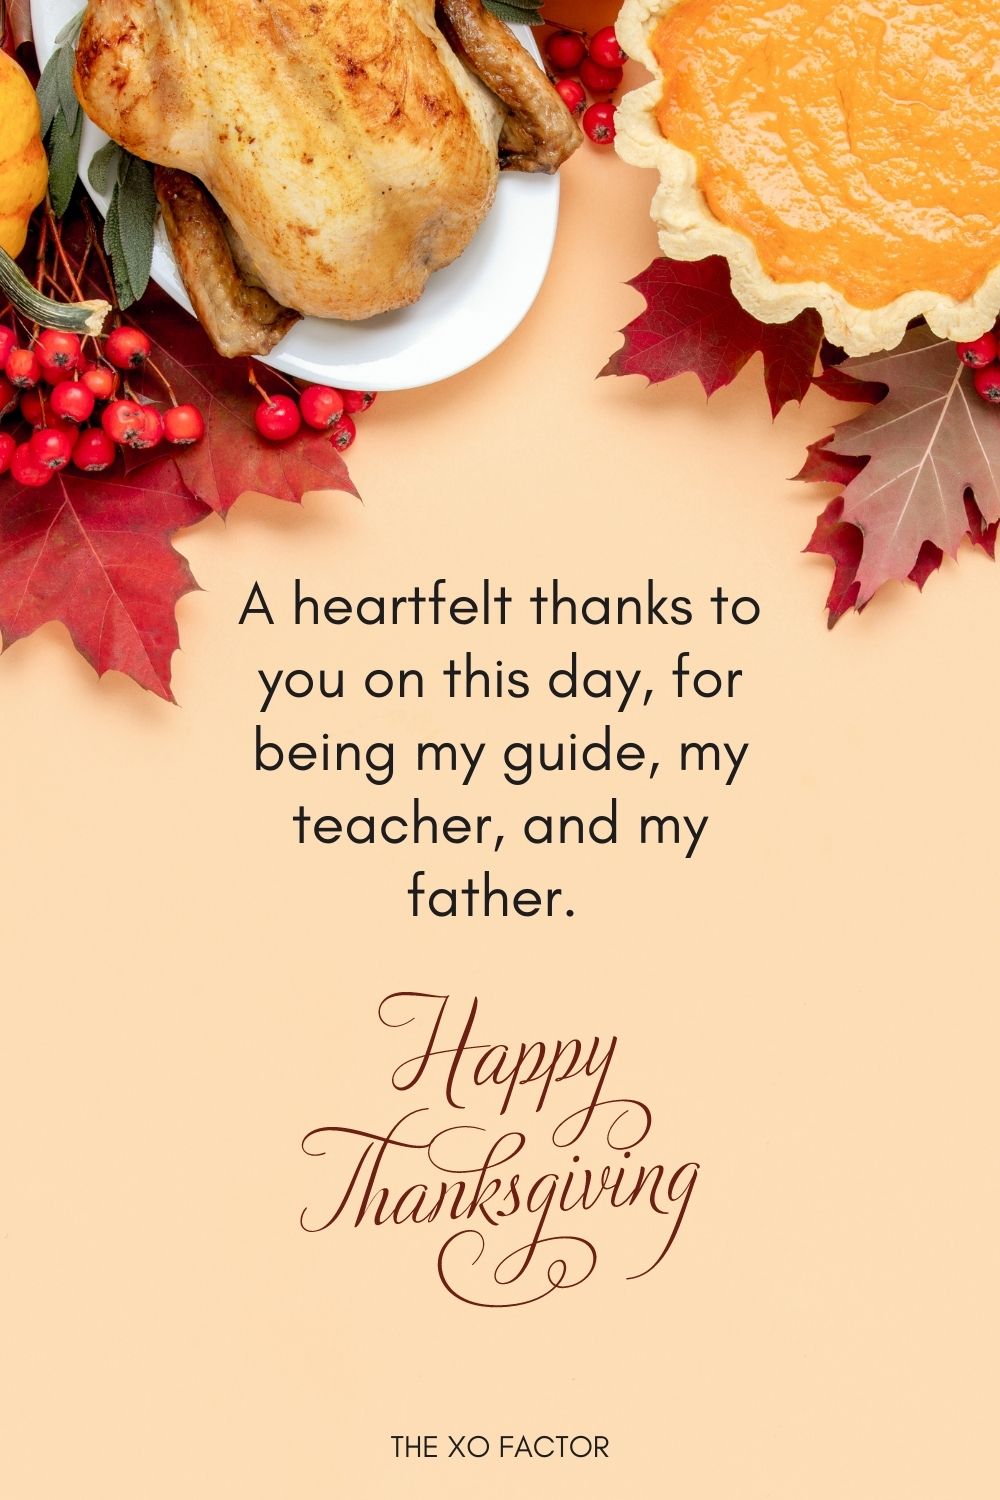 A heartfelt thanks to you on this day, for being my guide, my teacher, and my father. Happy Thanksgiving Dad!